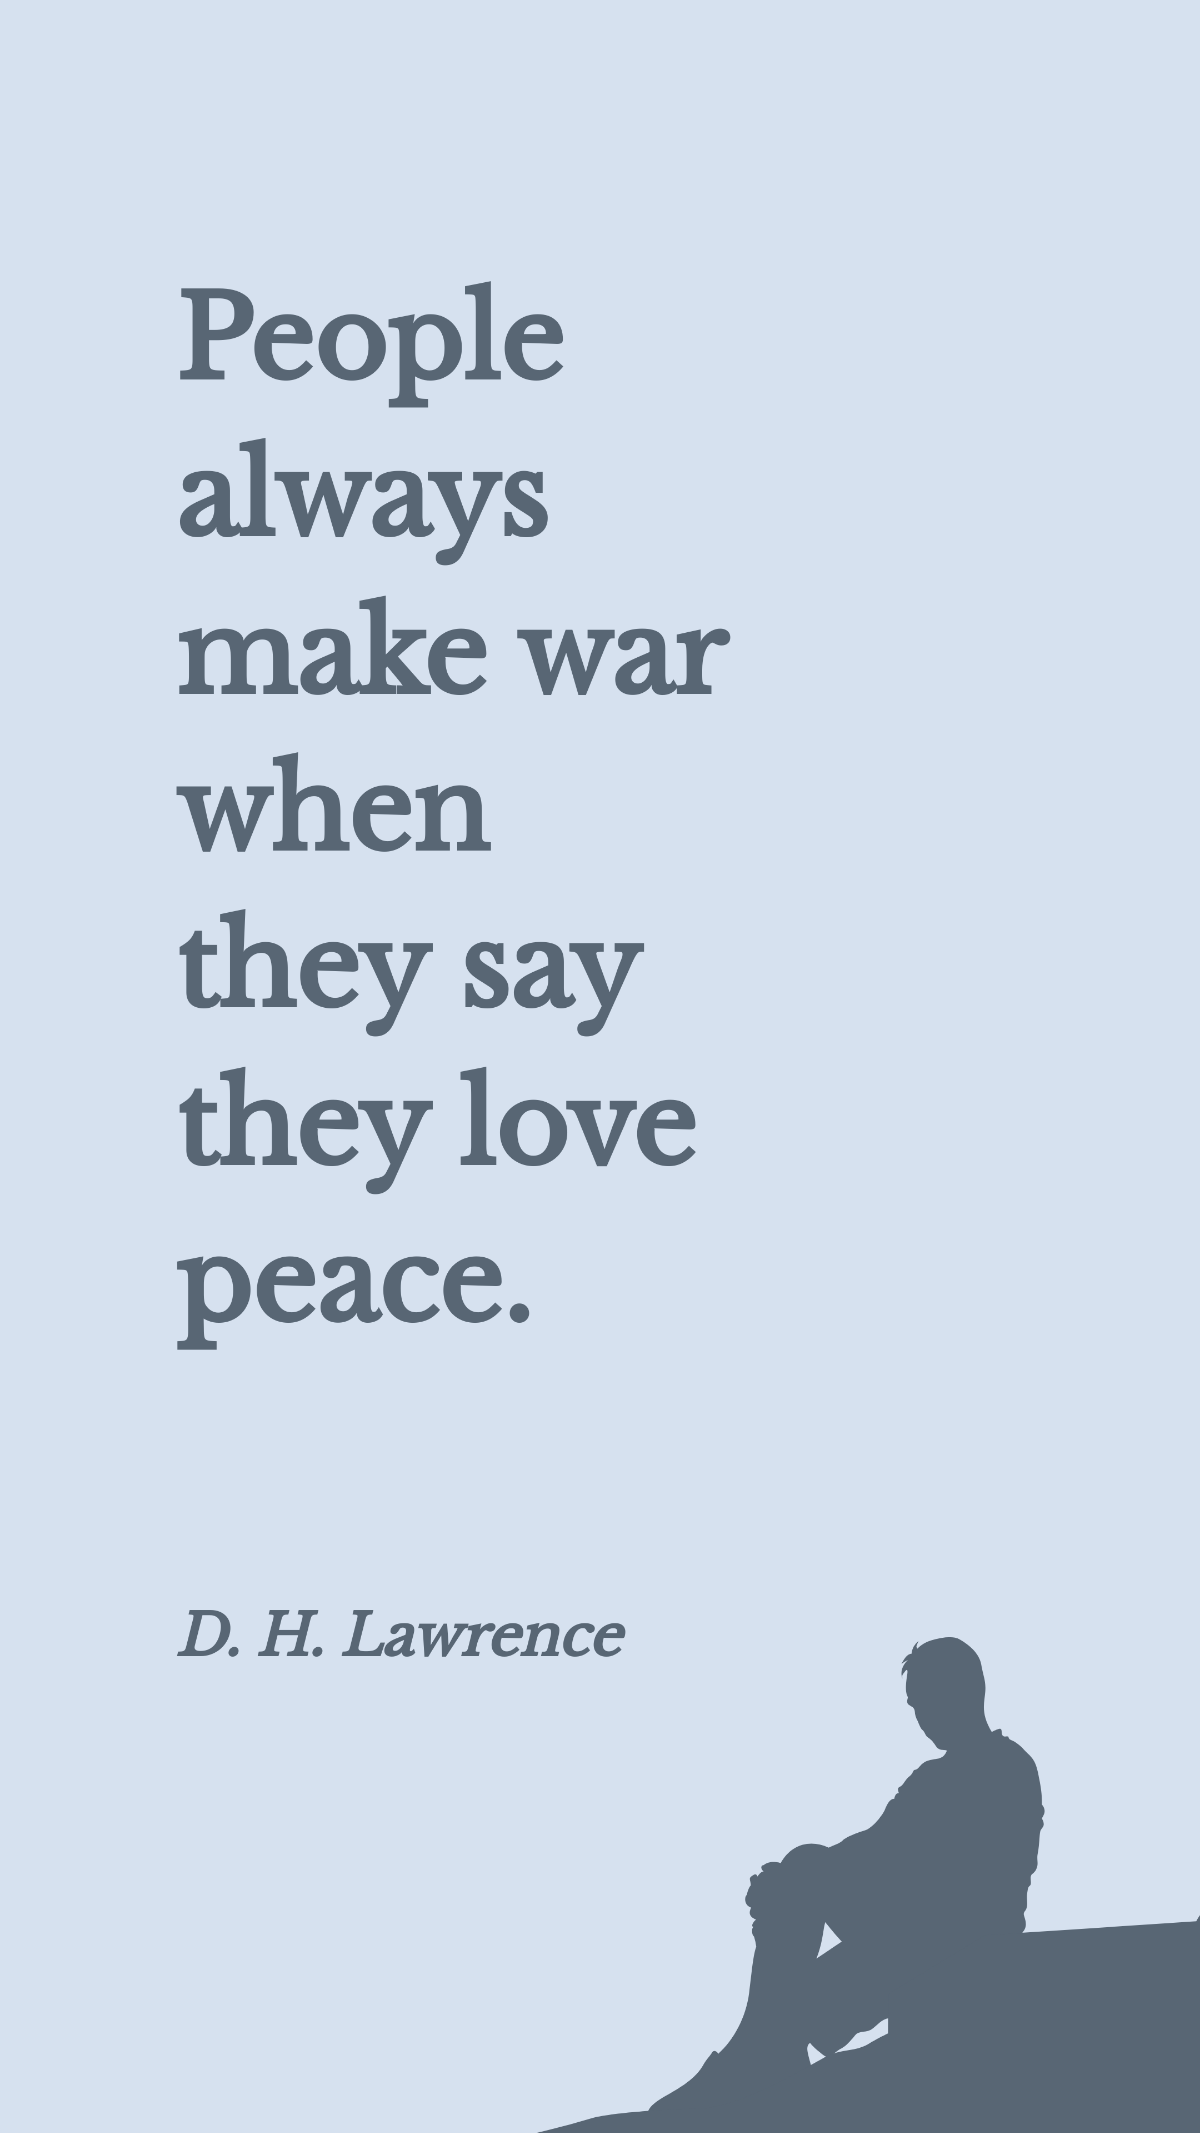 Free D. H. Lawrence - People always make war when they say they love peace. Template